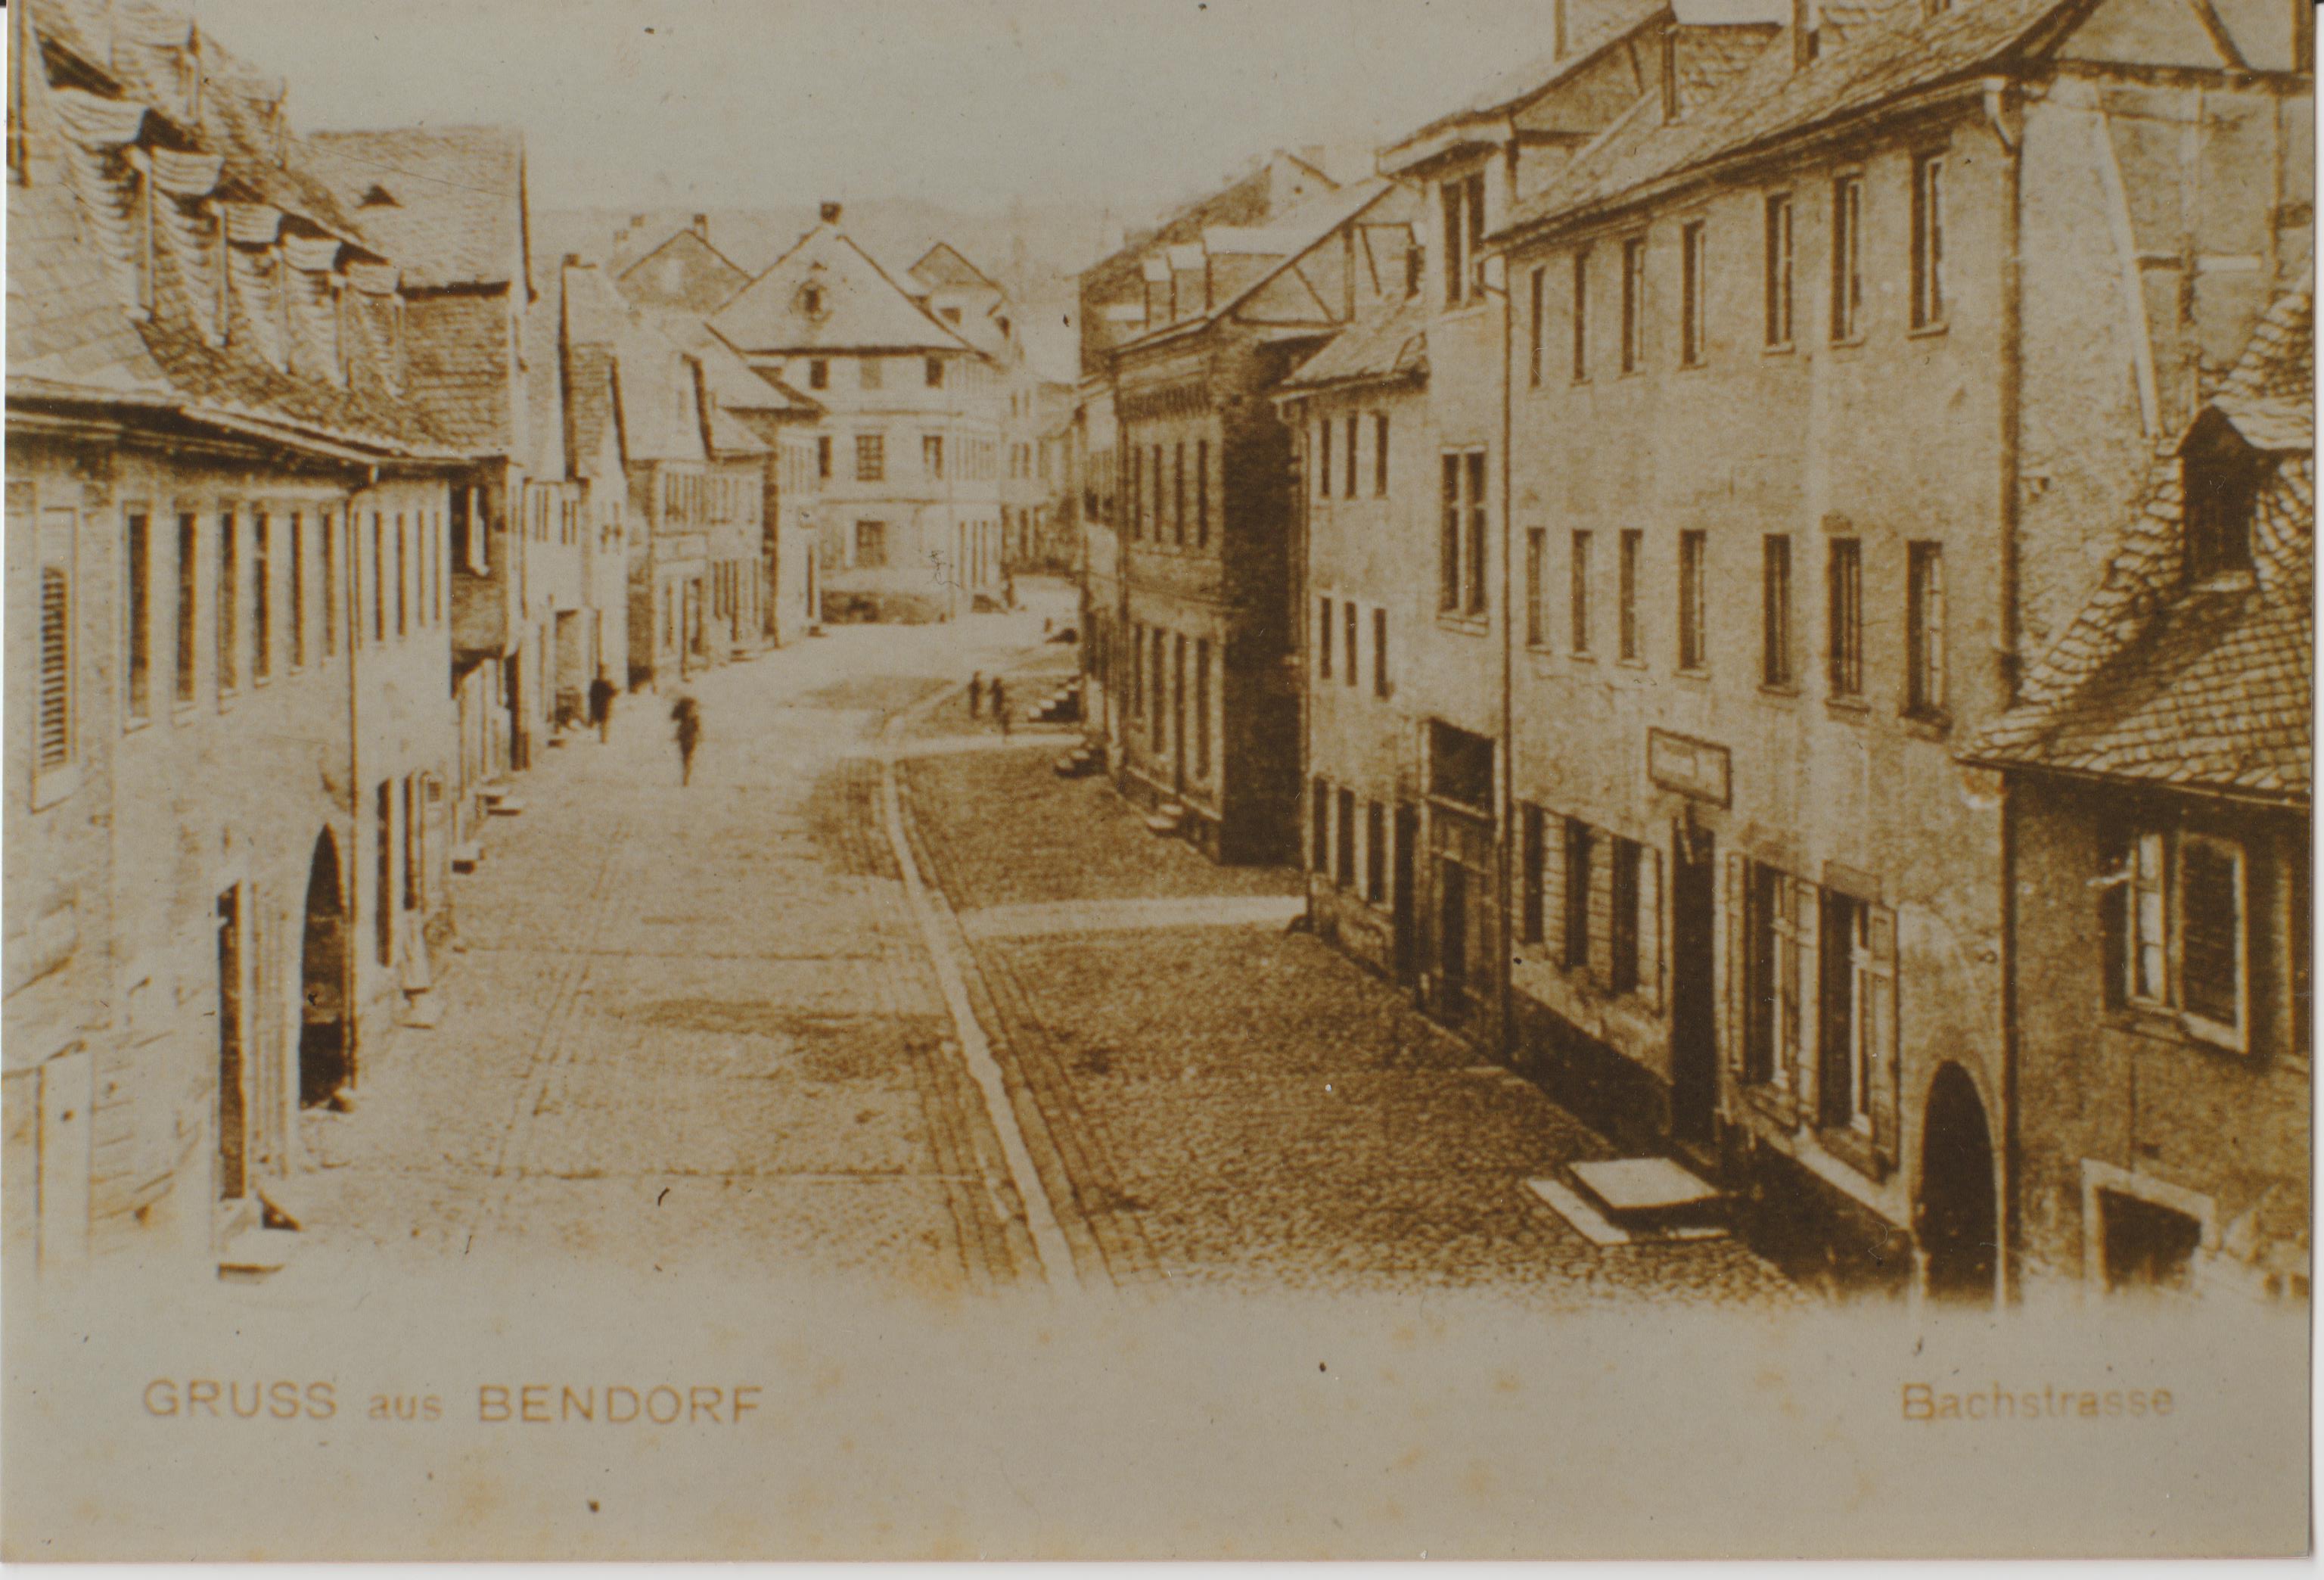 Untere Bachstrasse in Bendorf (REM CC BY-NC-SA)